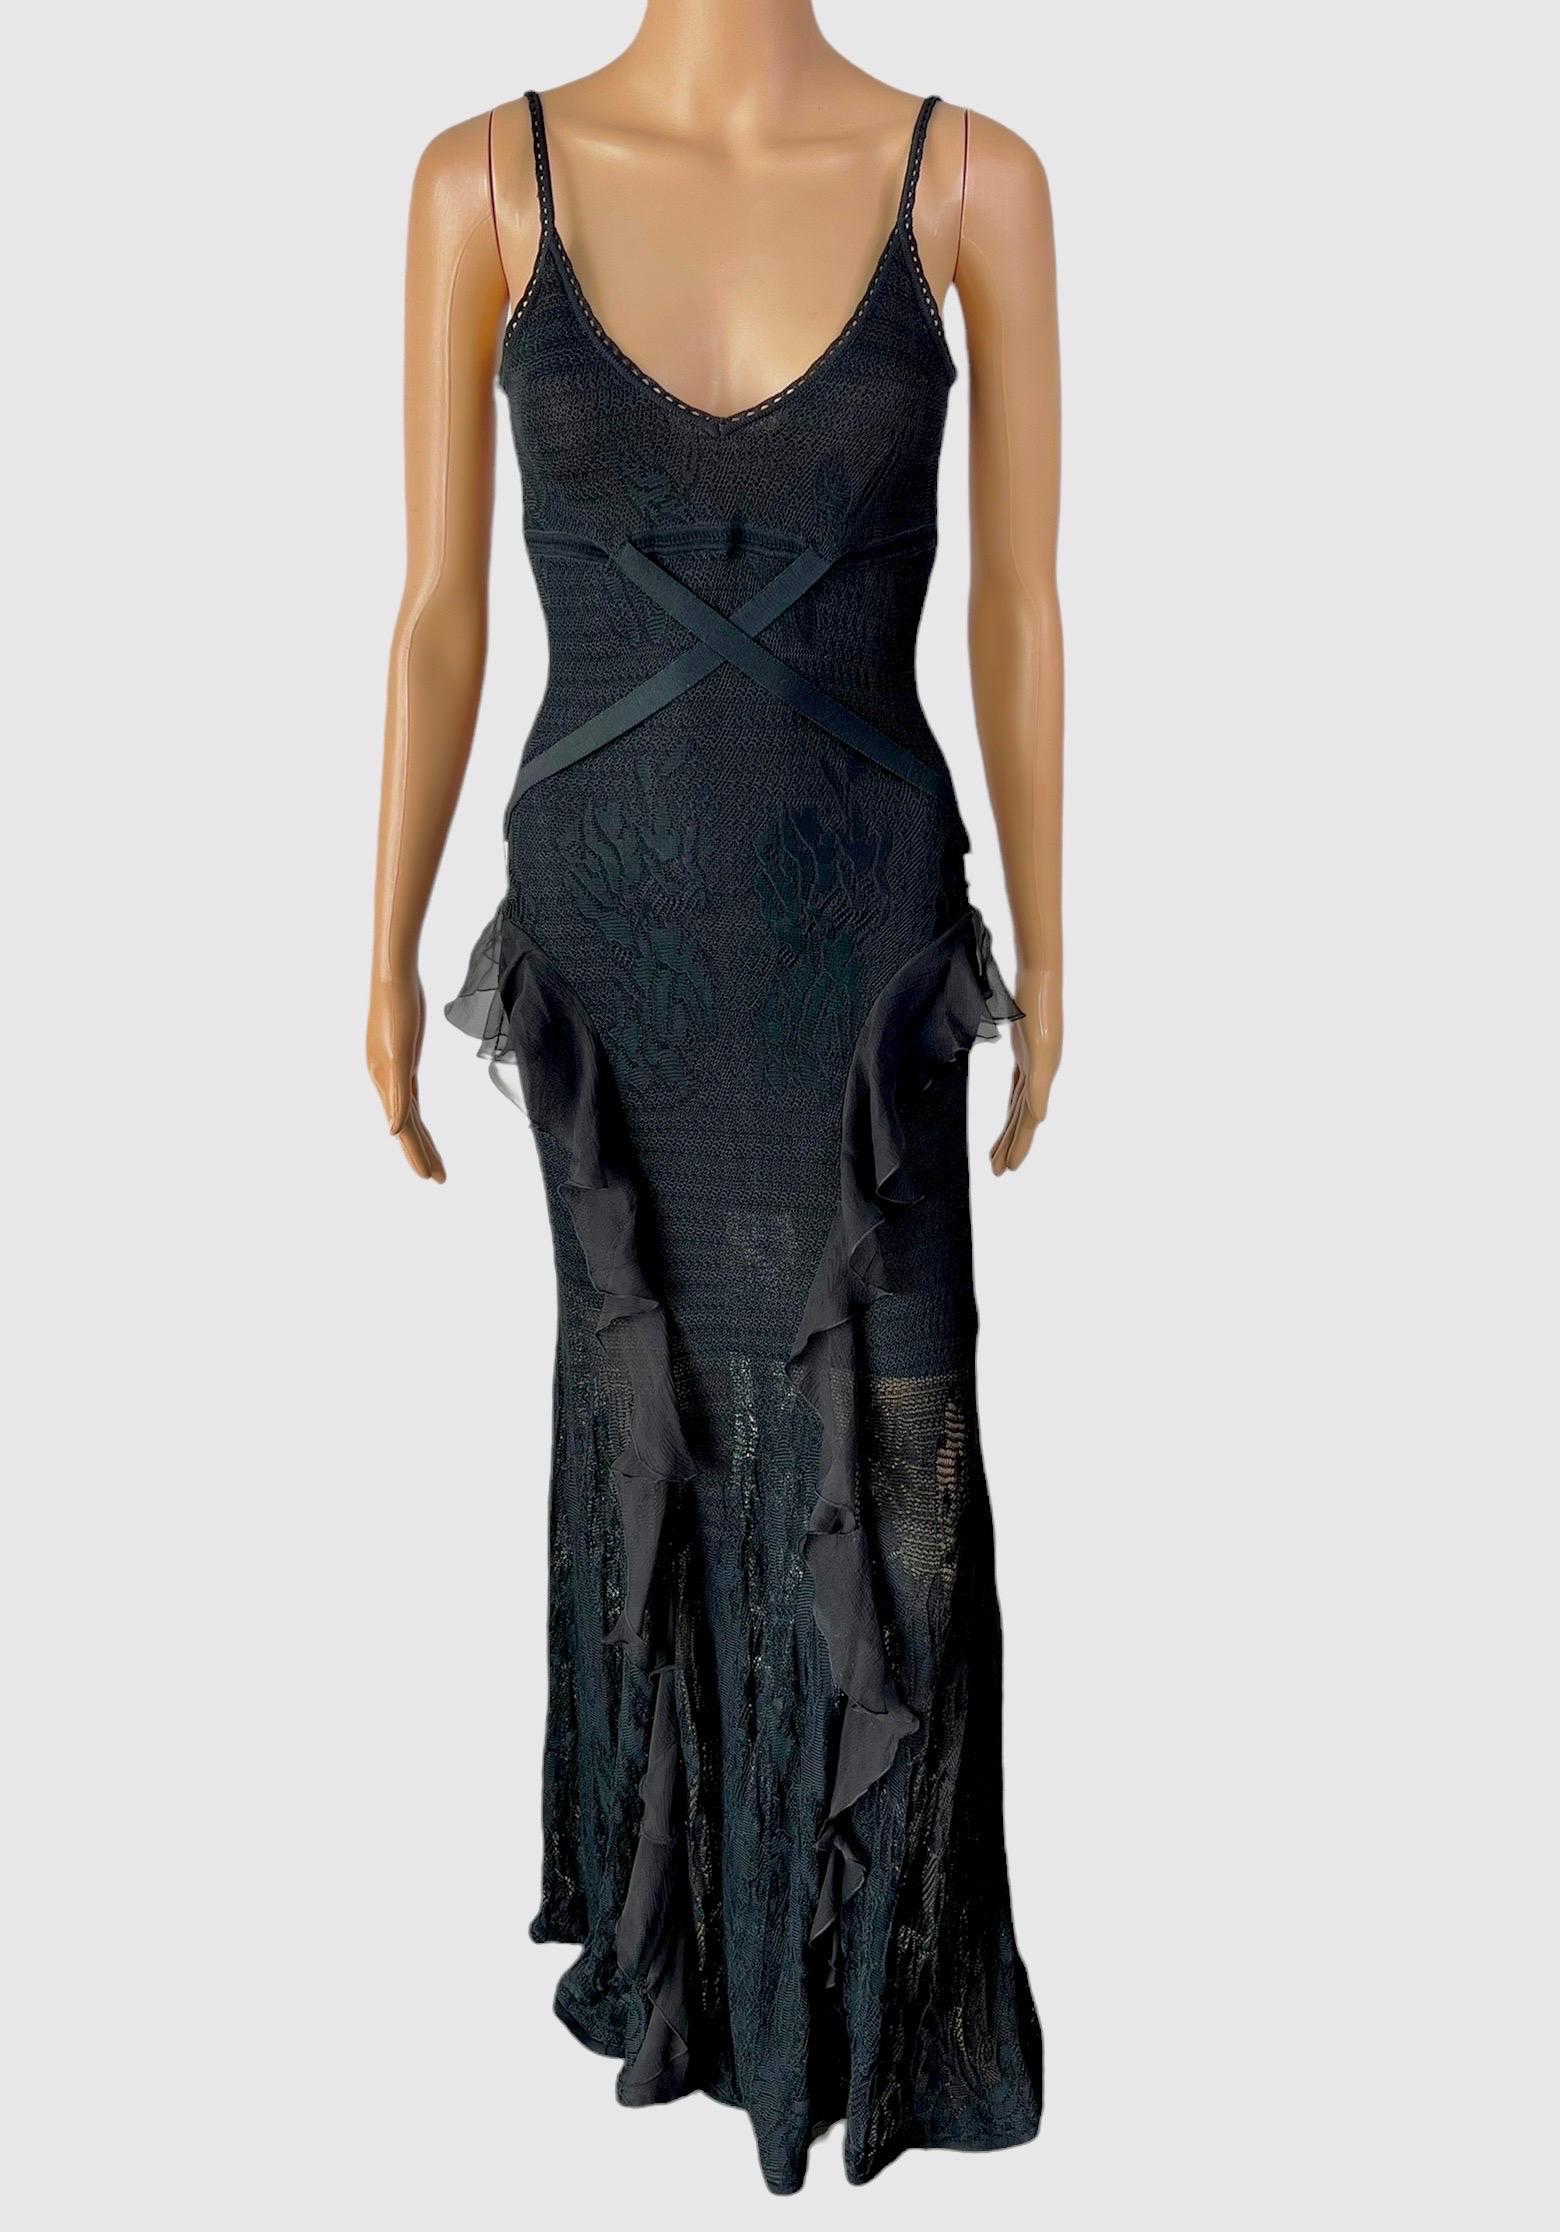 Christian Dior by John Galliano S/S2003 Sheer Lace Knit Black Evening Dress Gown For Sale 4